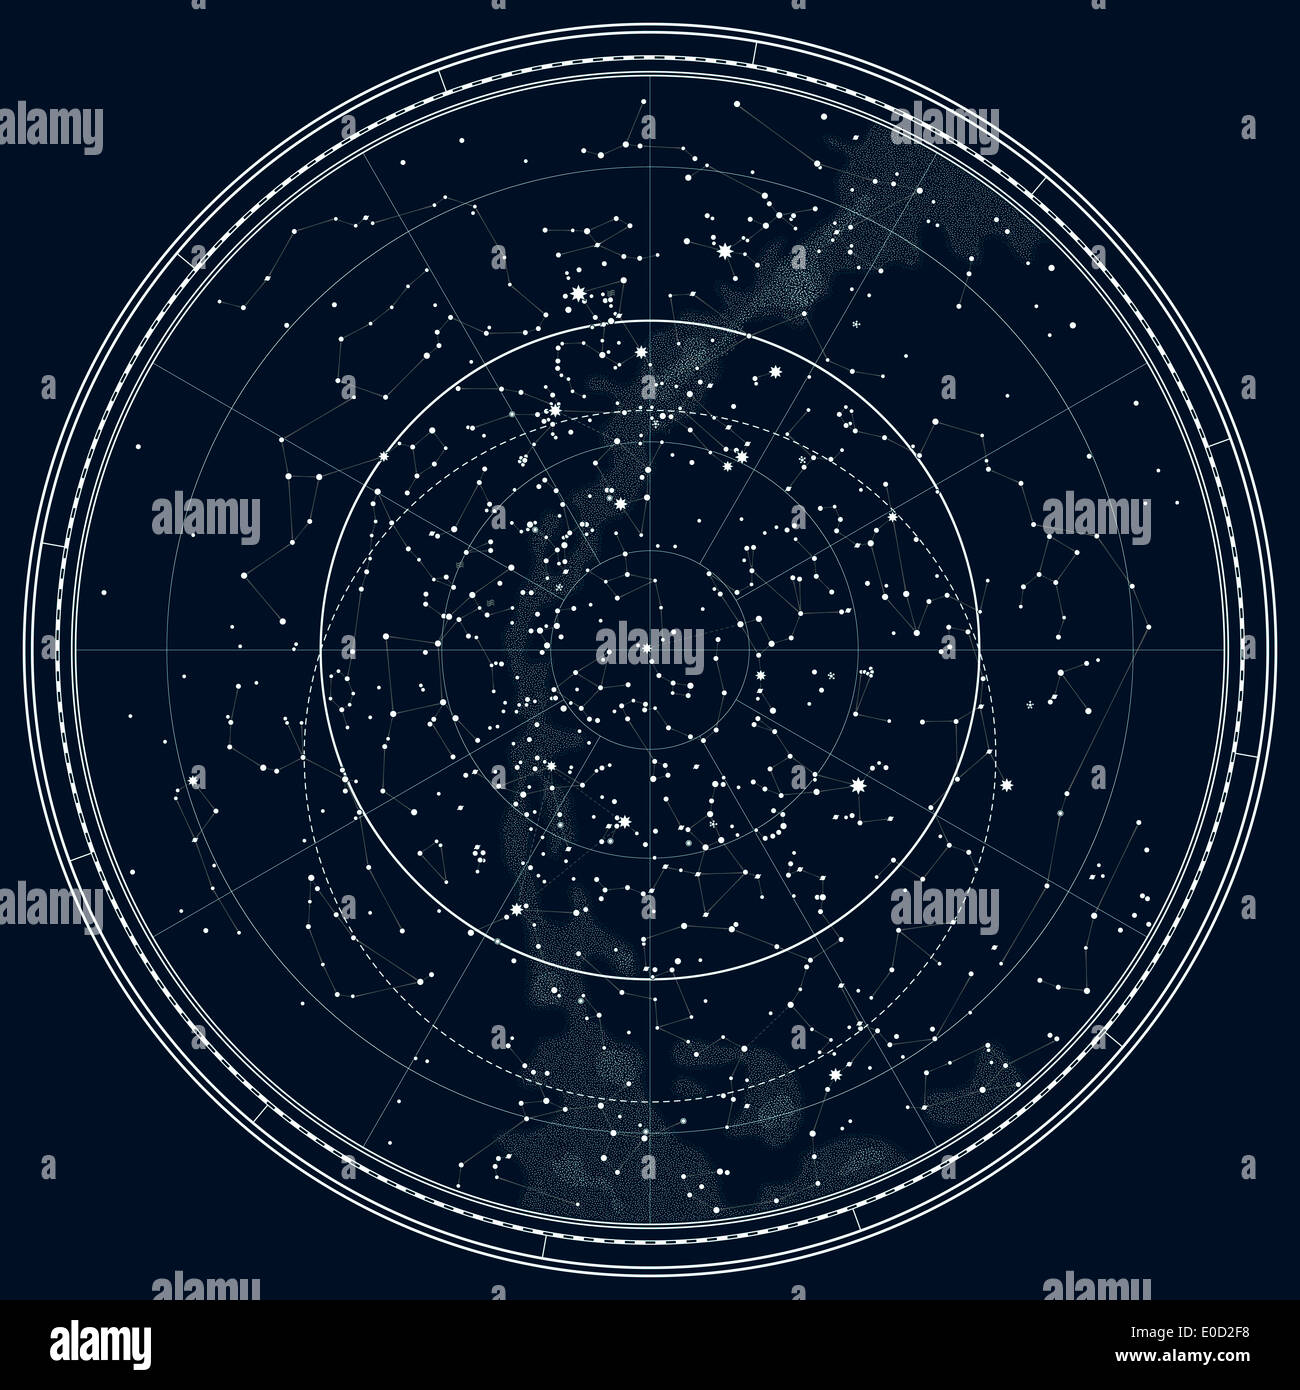 Astronomical Celestial Map Of The Northern Hemisphere Detailed Chart E0D2F8 